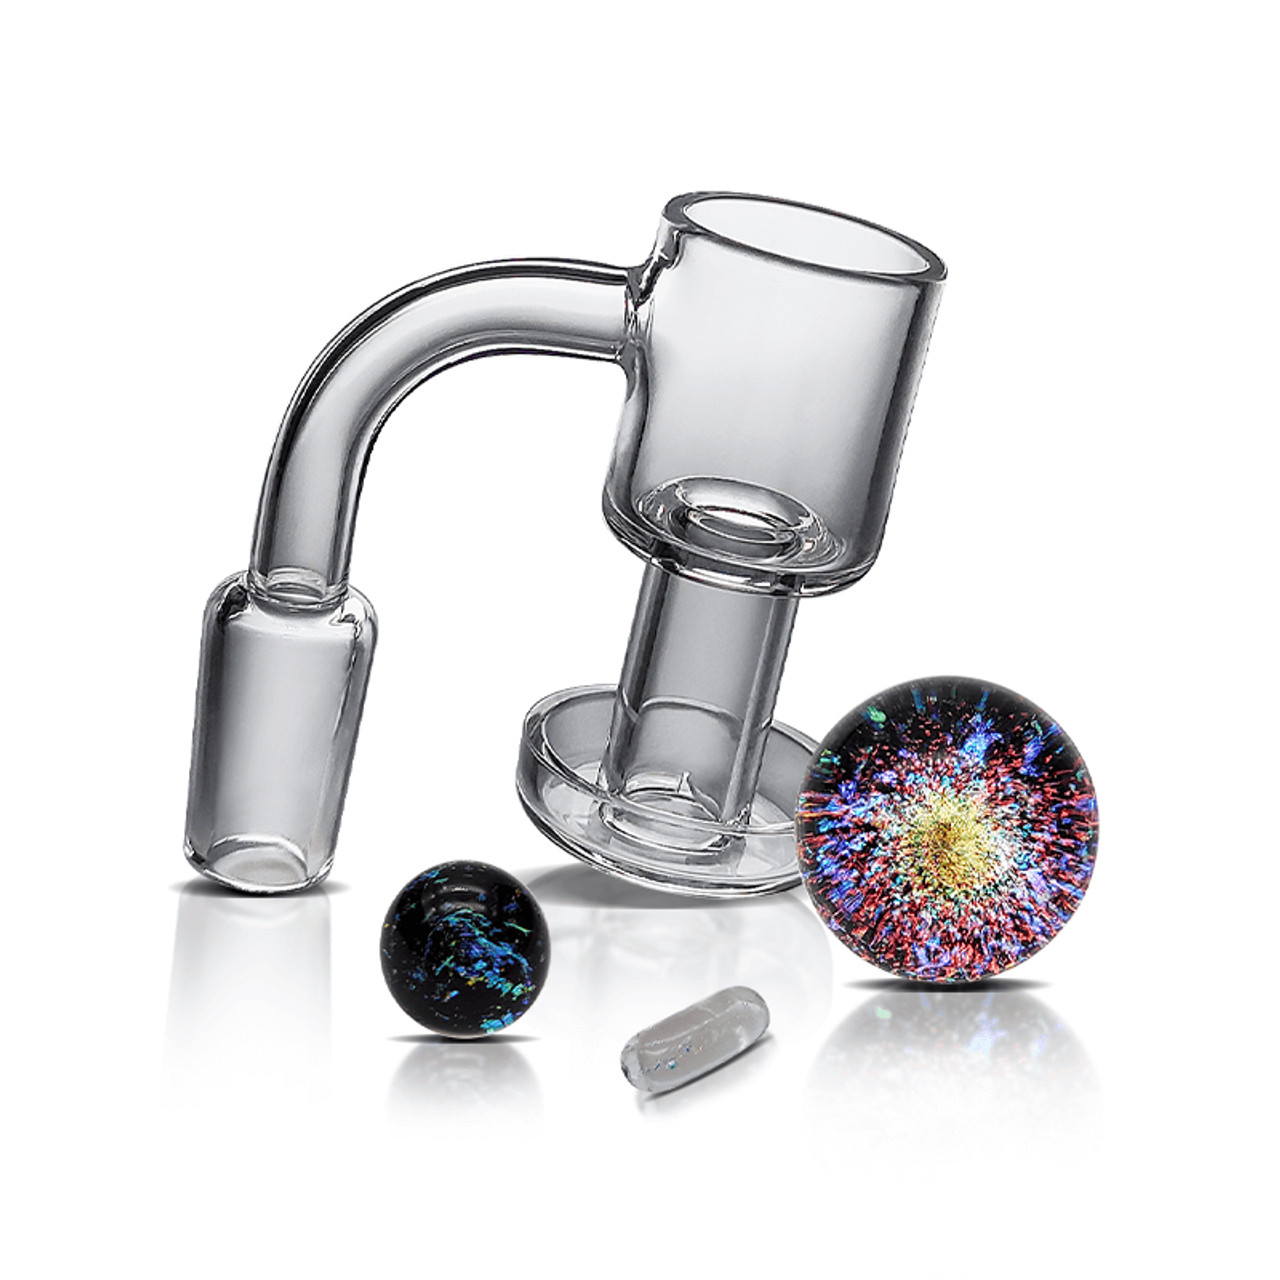 Terp Slurper 14mm Male 90 Degree Banger Kit with Terp Pearls, Vortex Carb  Cap & Marble